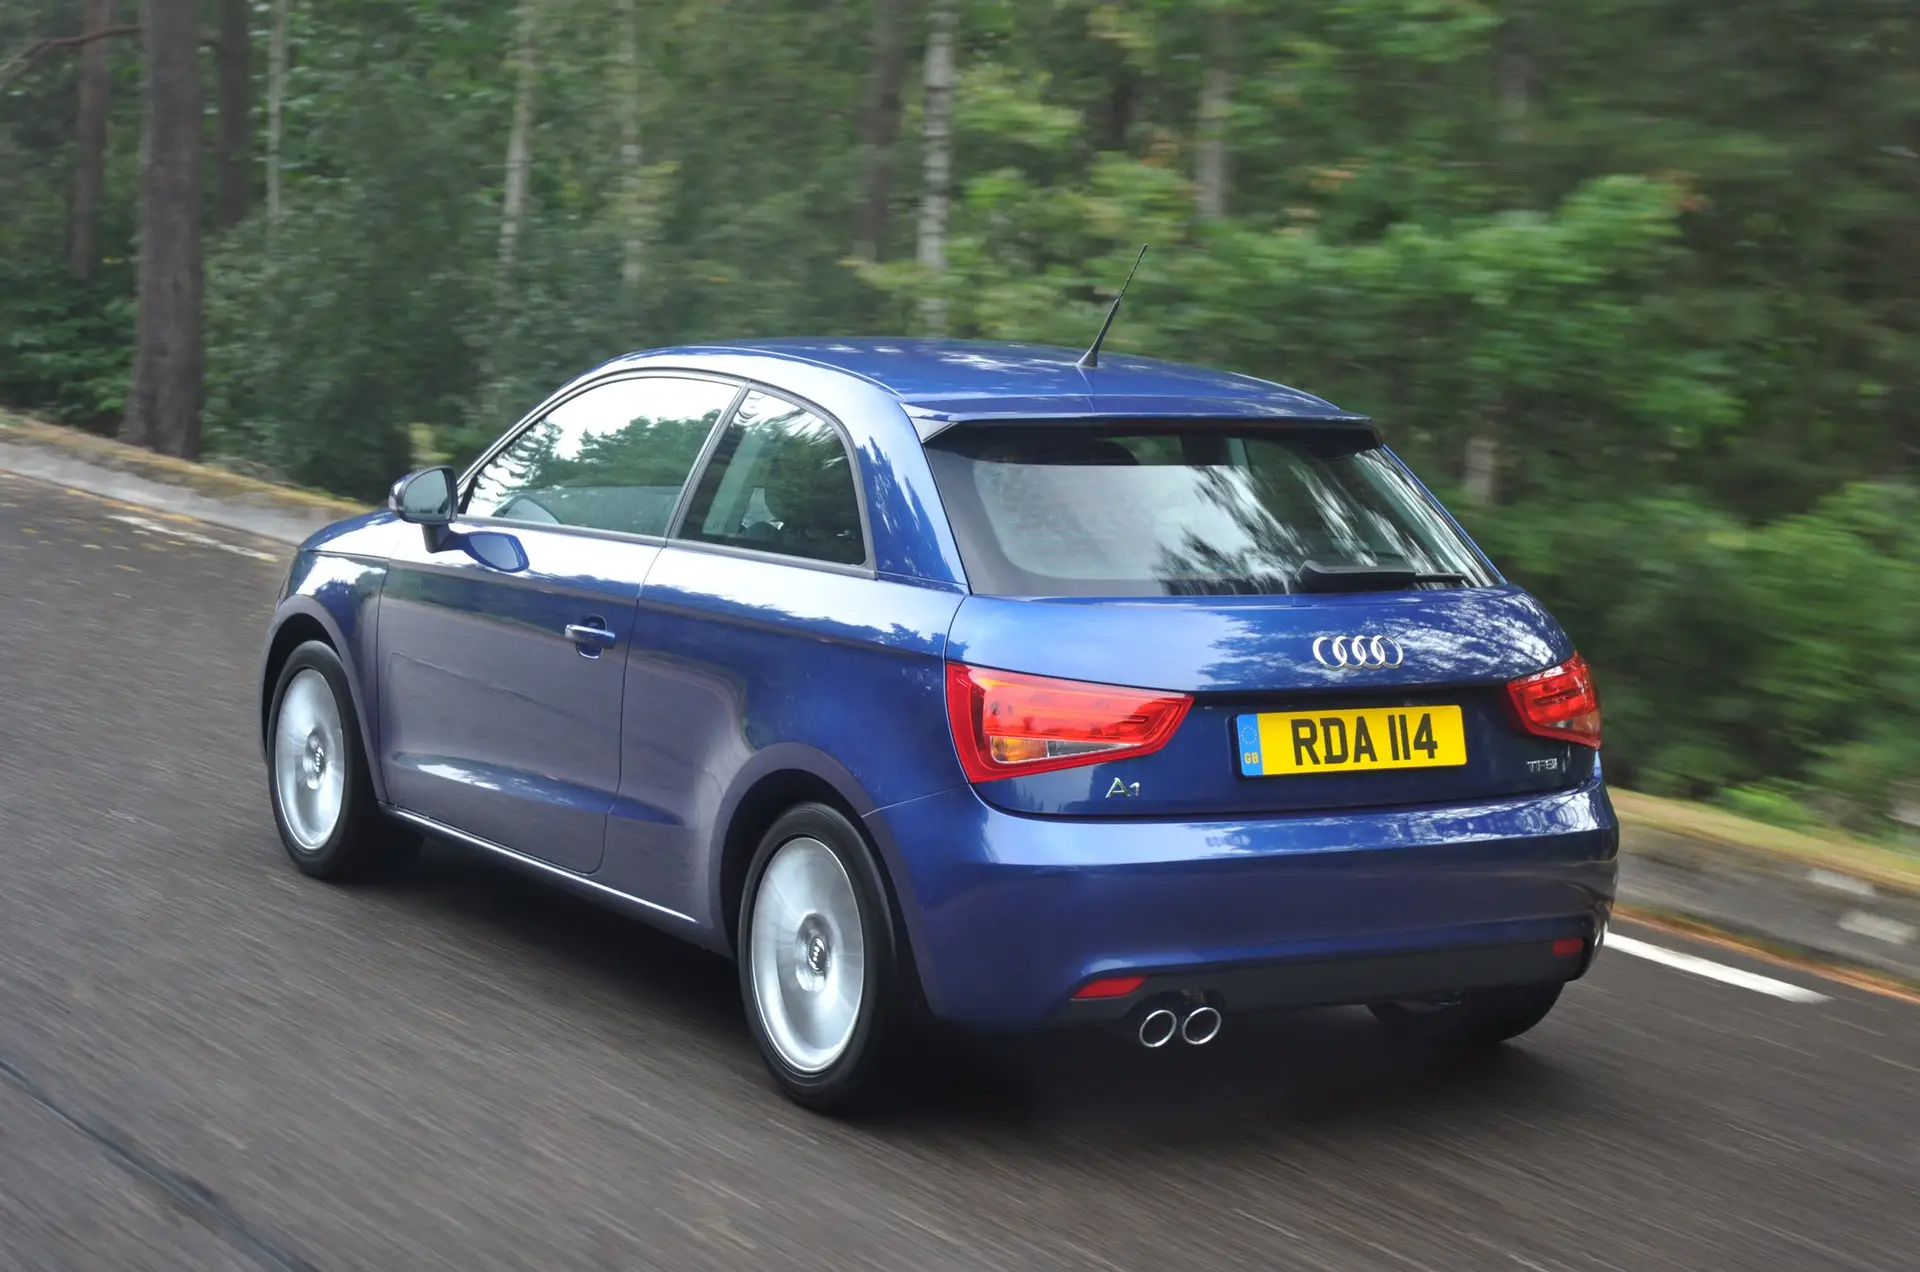 Audi A1 (2010-2018) Review: exterior rear three quarter photo of the Audi A1 on the road